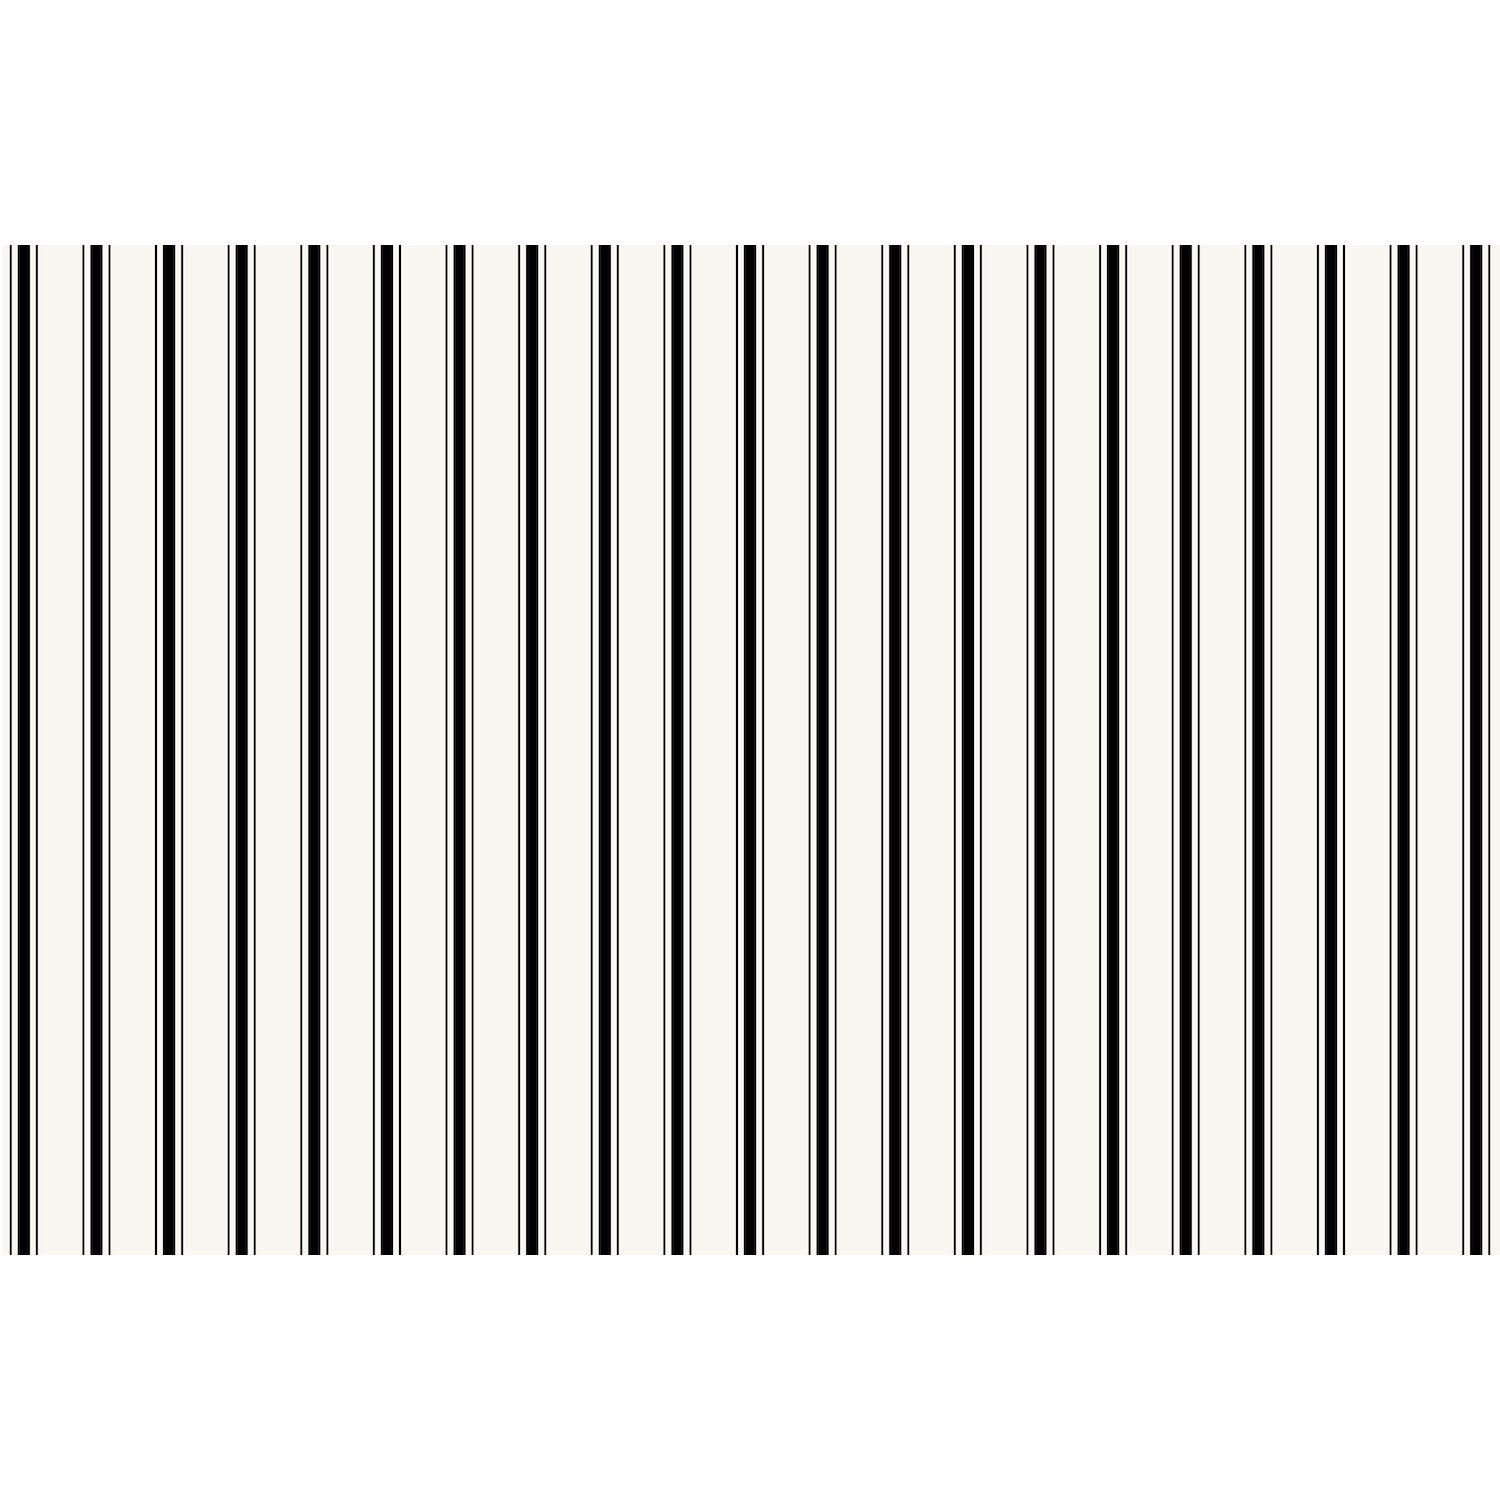 Vertical, evenly spaced black lines in a thin-thick-thin pattern over a white background.